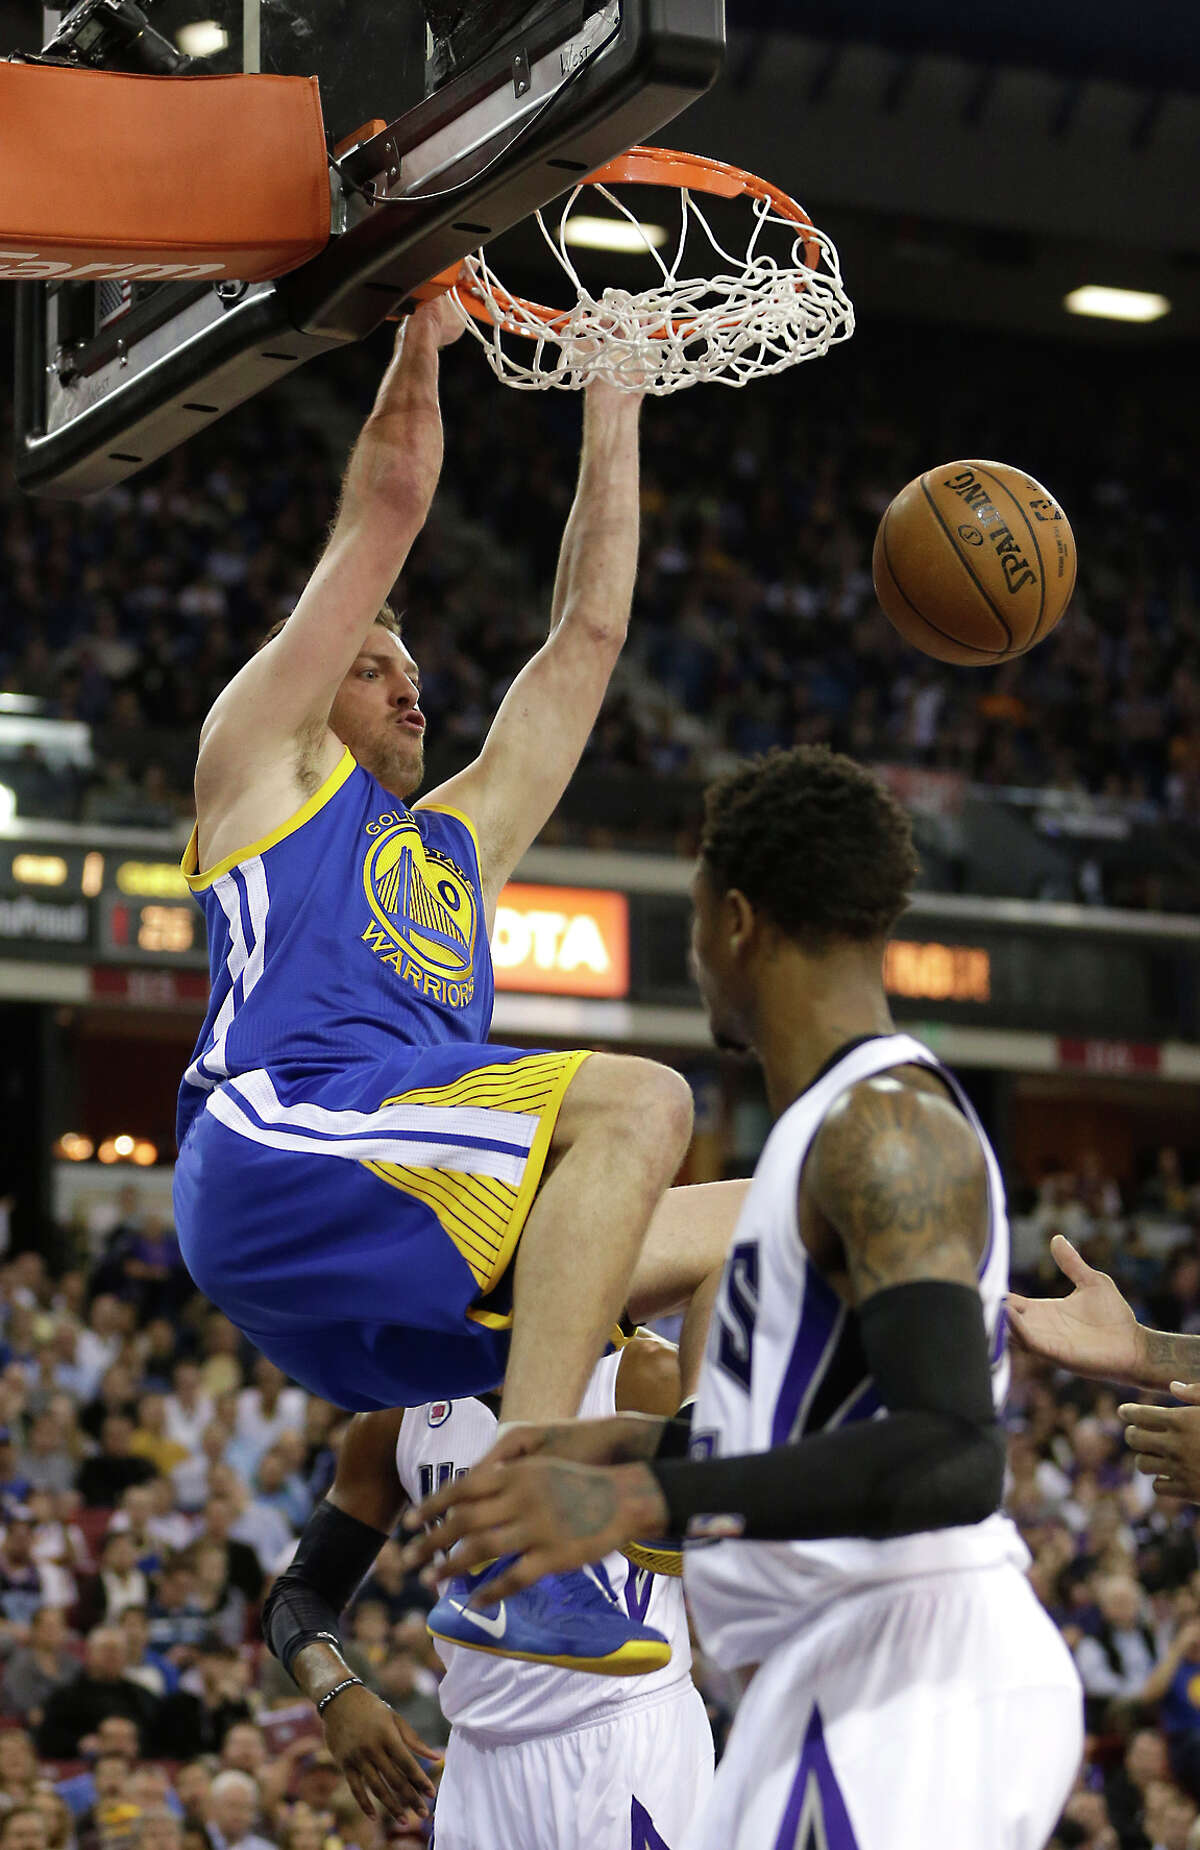 David Lee stuffs home two of his eight points over the Kings’ Ben McLemore on a night when the Golden State bench players contributed 61 points.